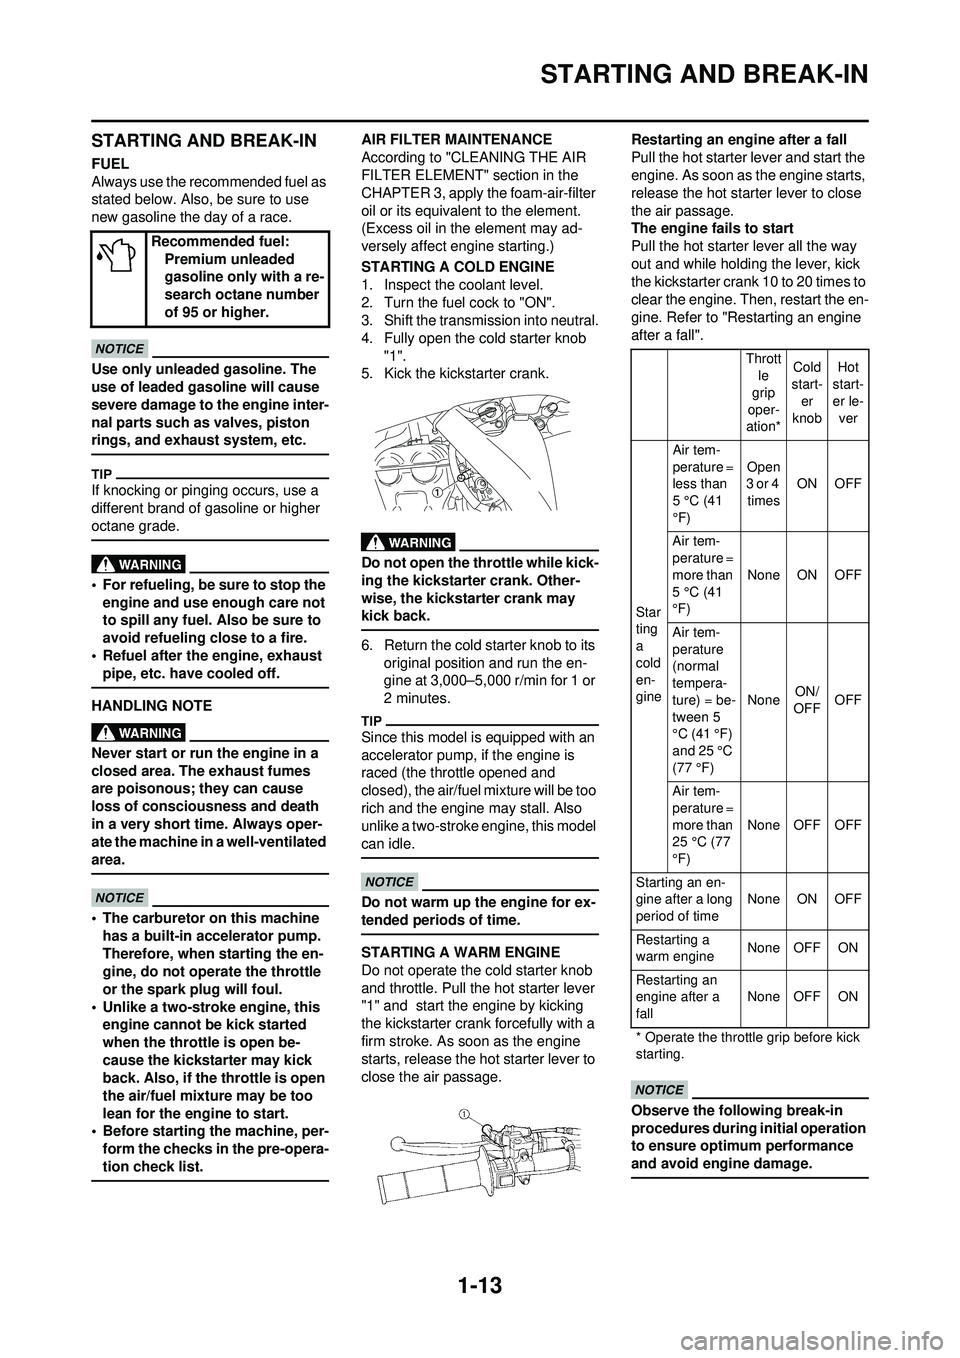 YAMAHA YZ250F 2010  Owners Manual 1-13
STARTING AND BREAK-IN
STARTING AND BREAK-IN
FUEL
Always use the recommended fuel as 
stated below. Also, be sure to use 
new gasoline the day of a race.
Use only unleaded gasoline. The 
use of le